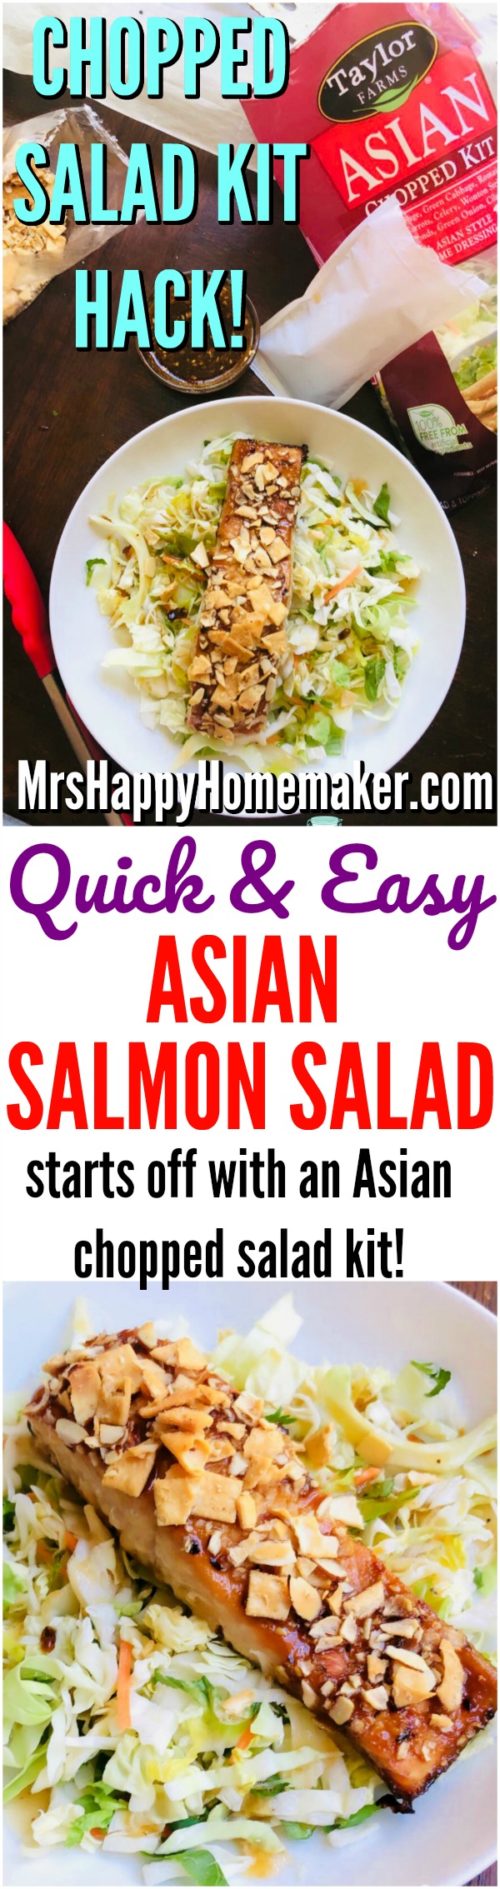 Quick and Easy Asian Salmon Salad - starts with an Asian chopped salad kit